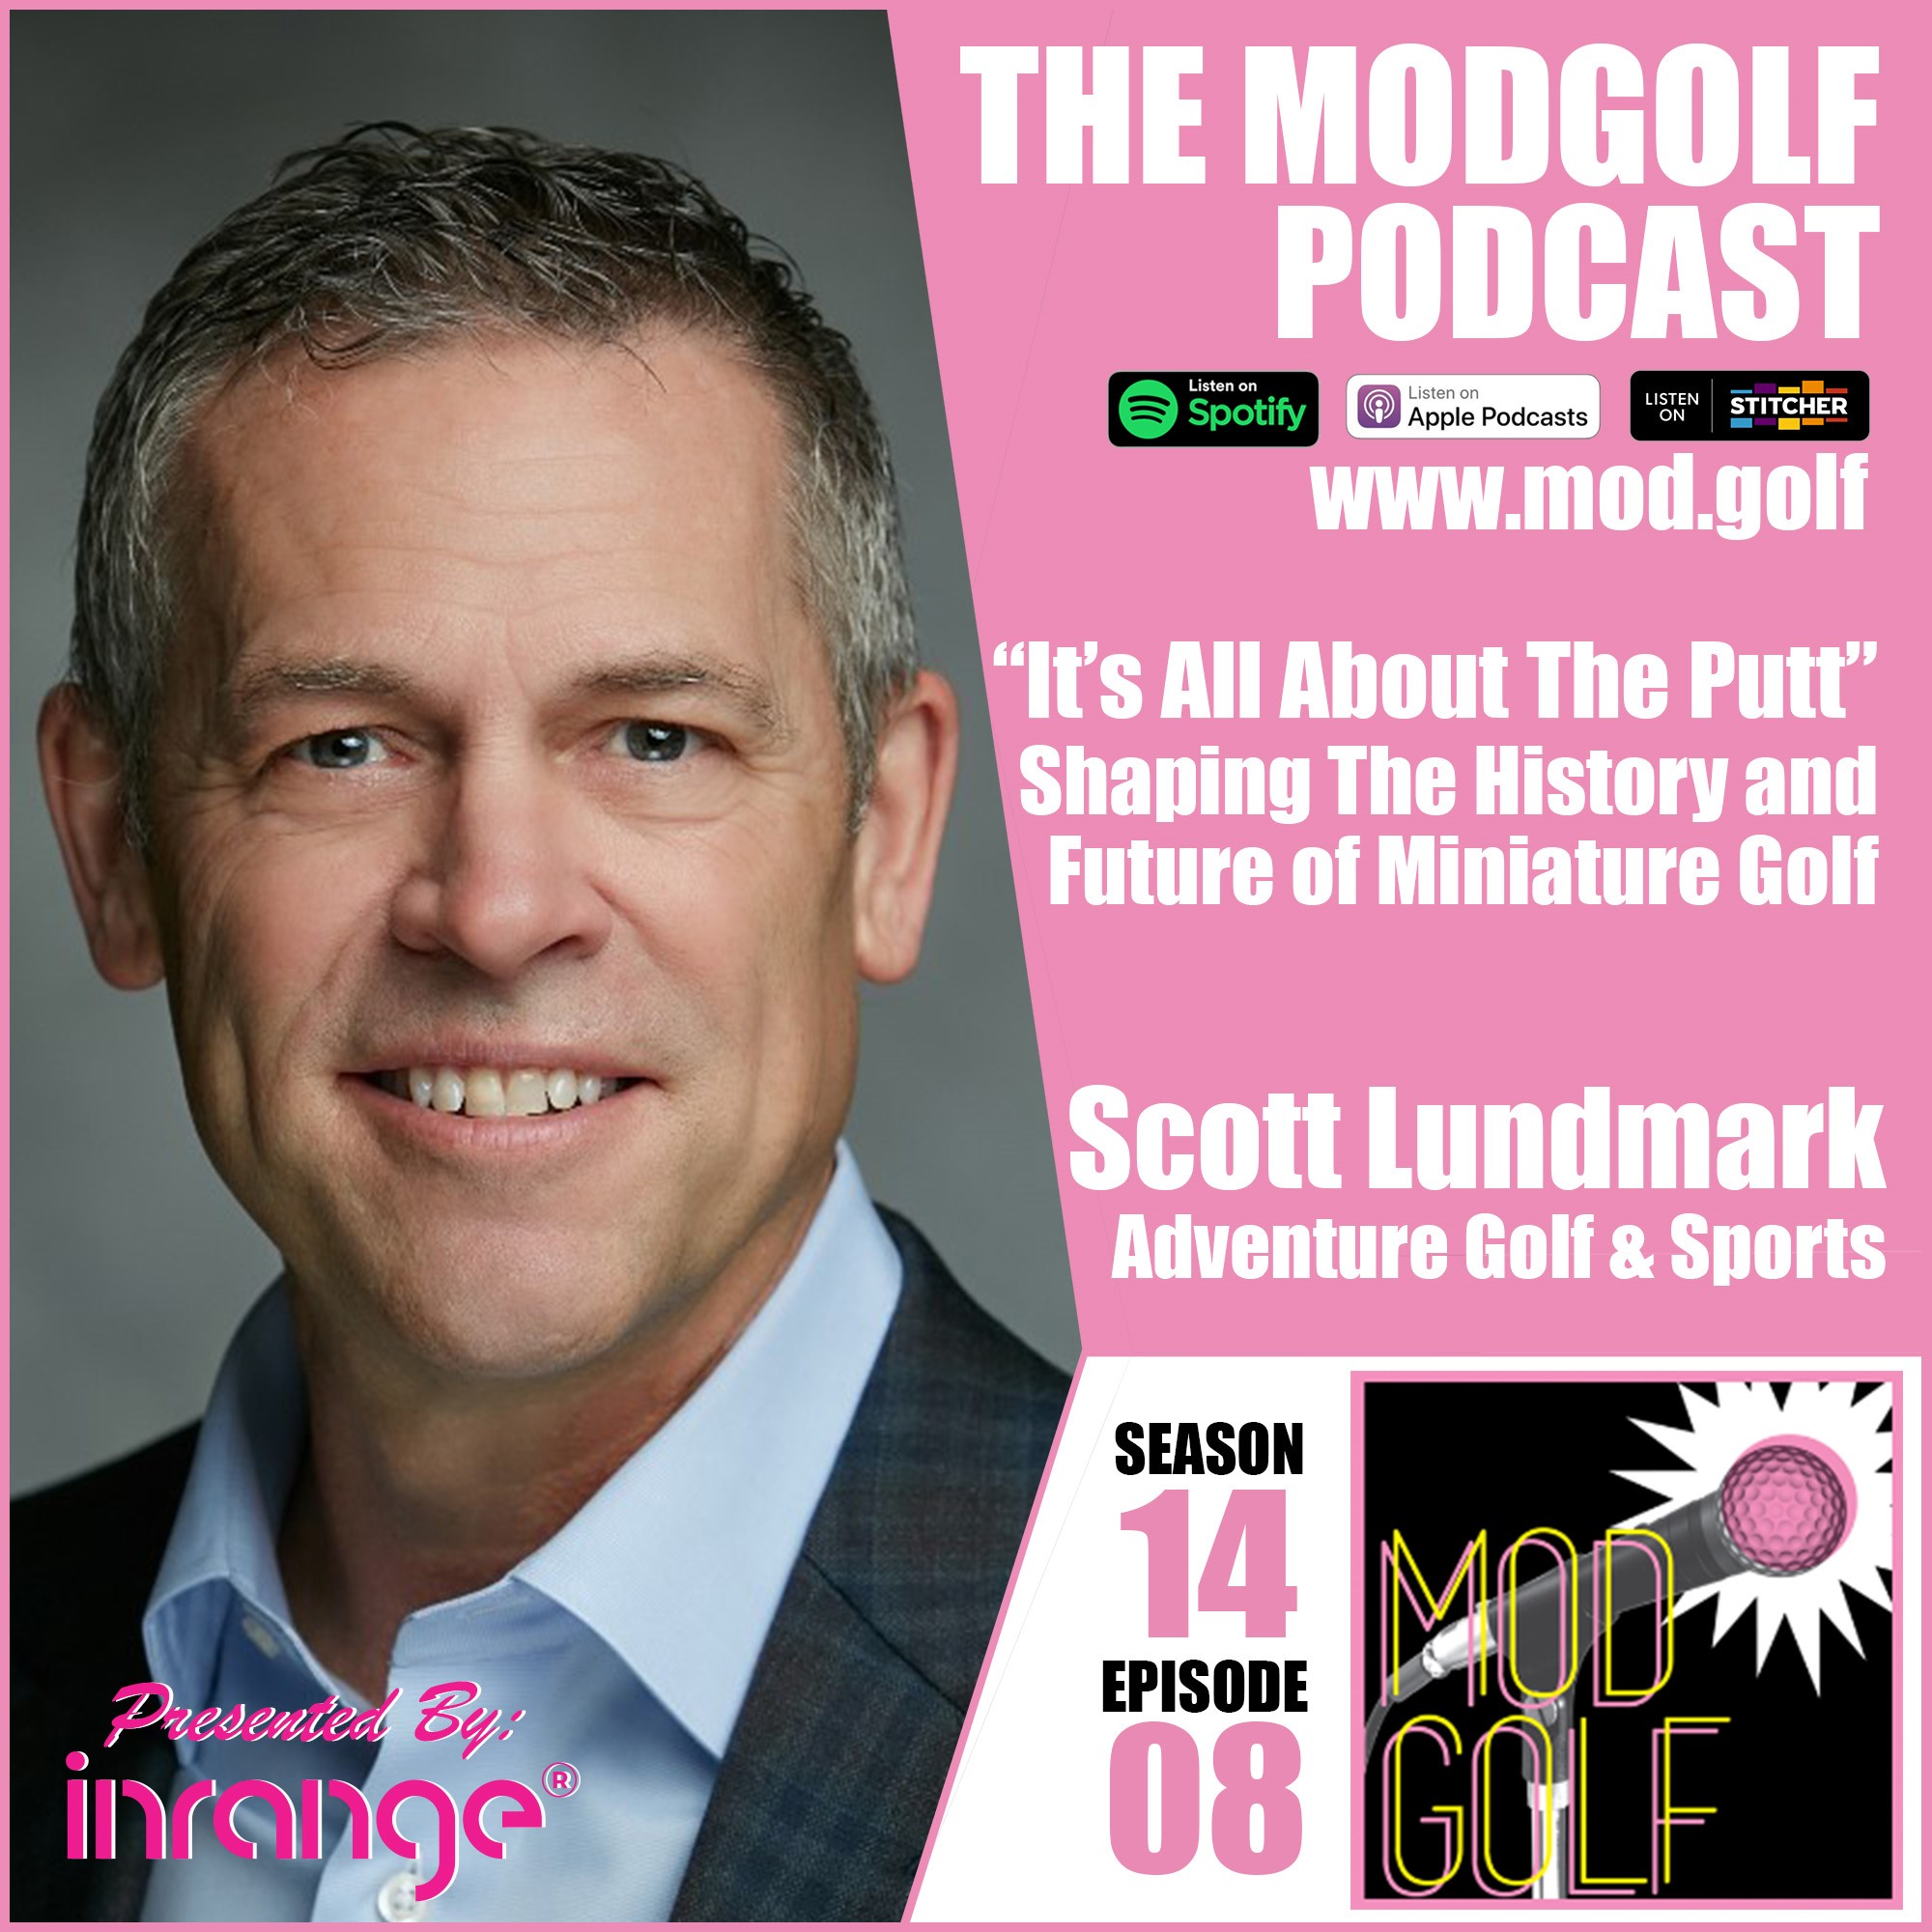 The Modgolf podcats with Scott Lundmark